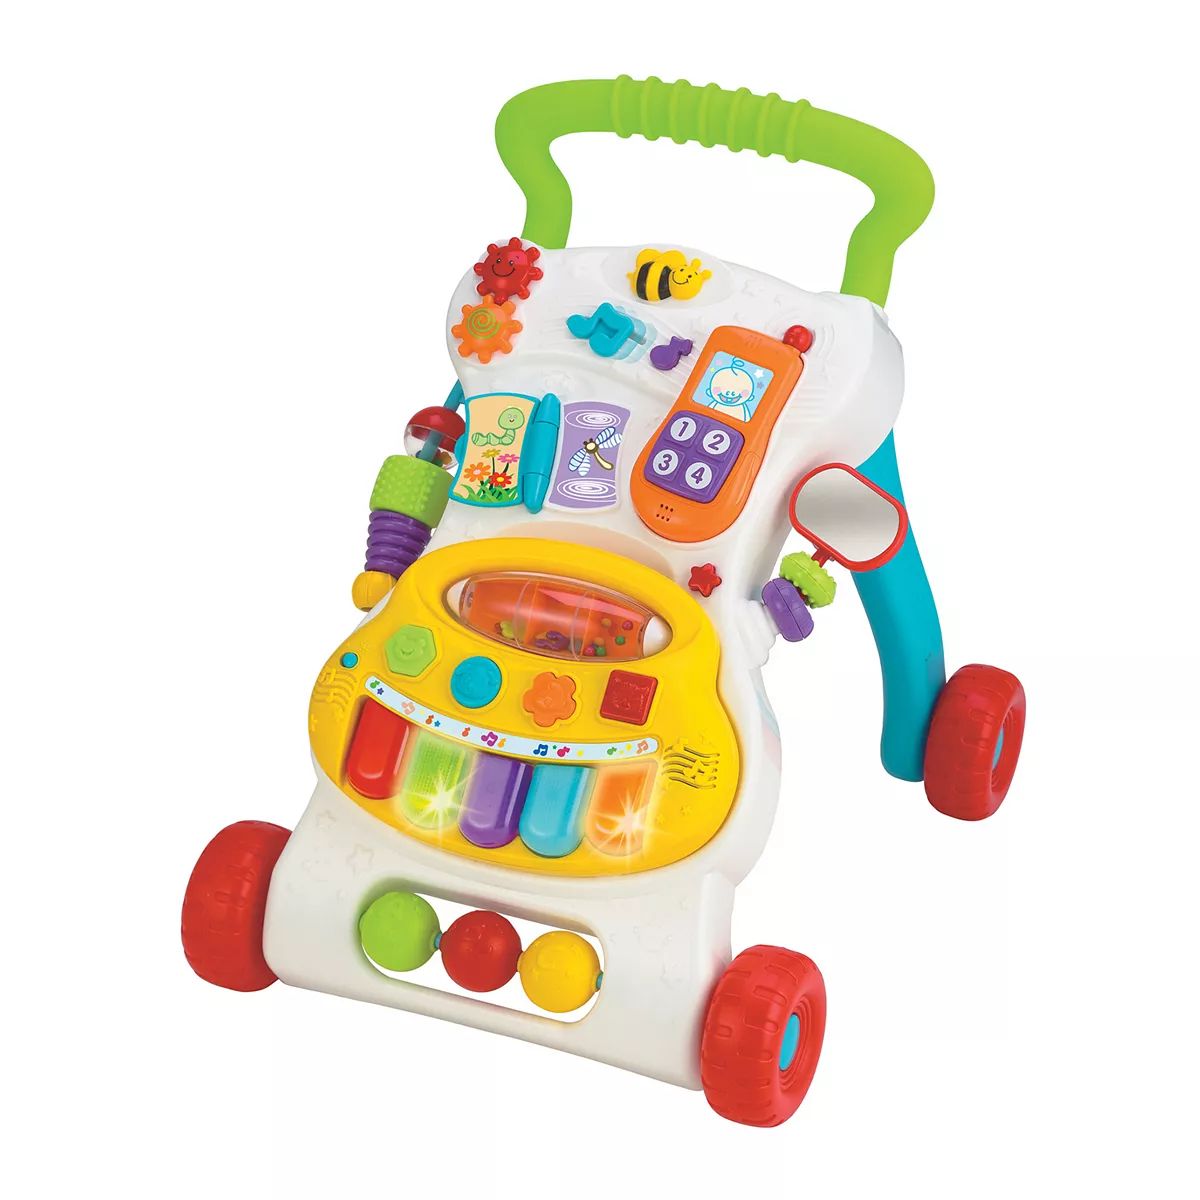 Winfat Grow With Me Musical Walker | Kohl's